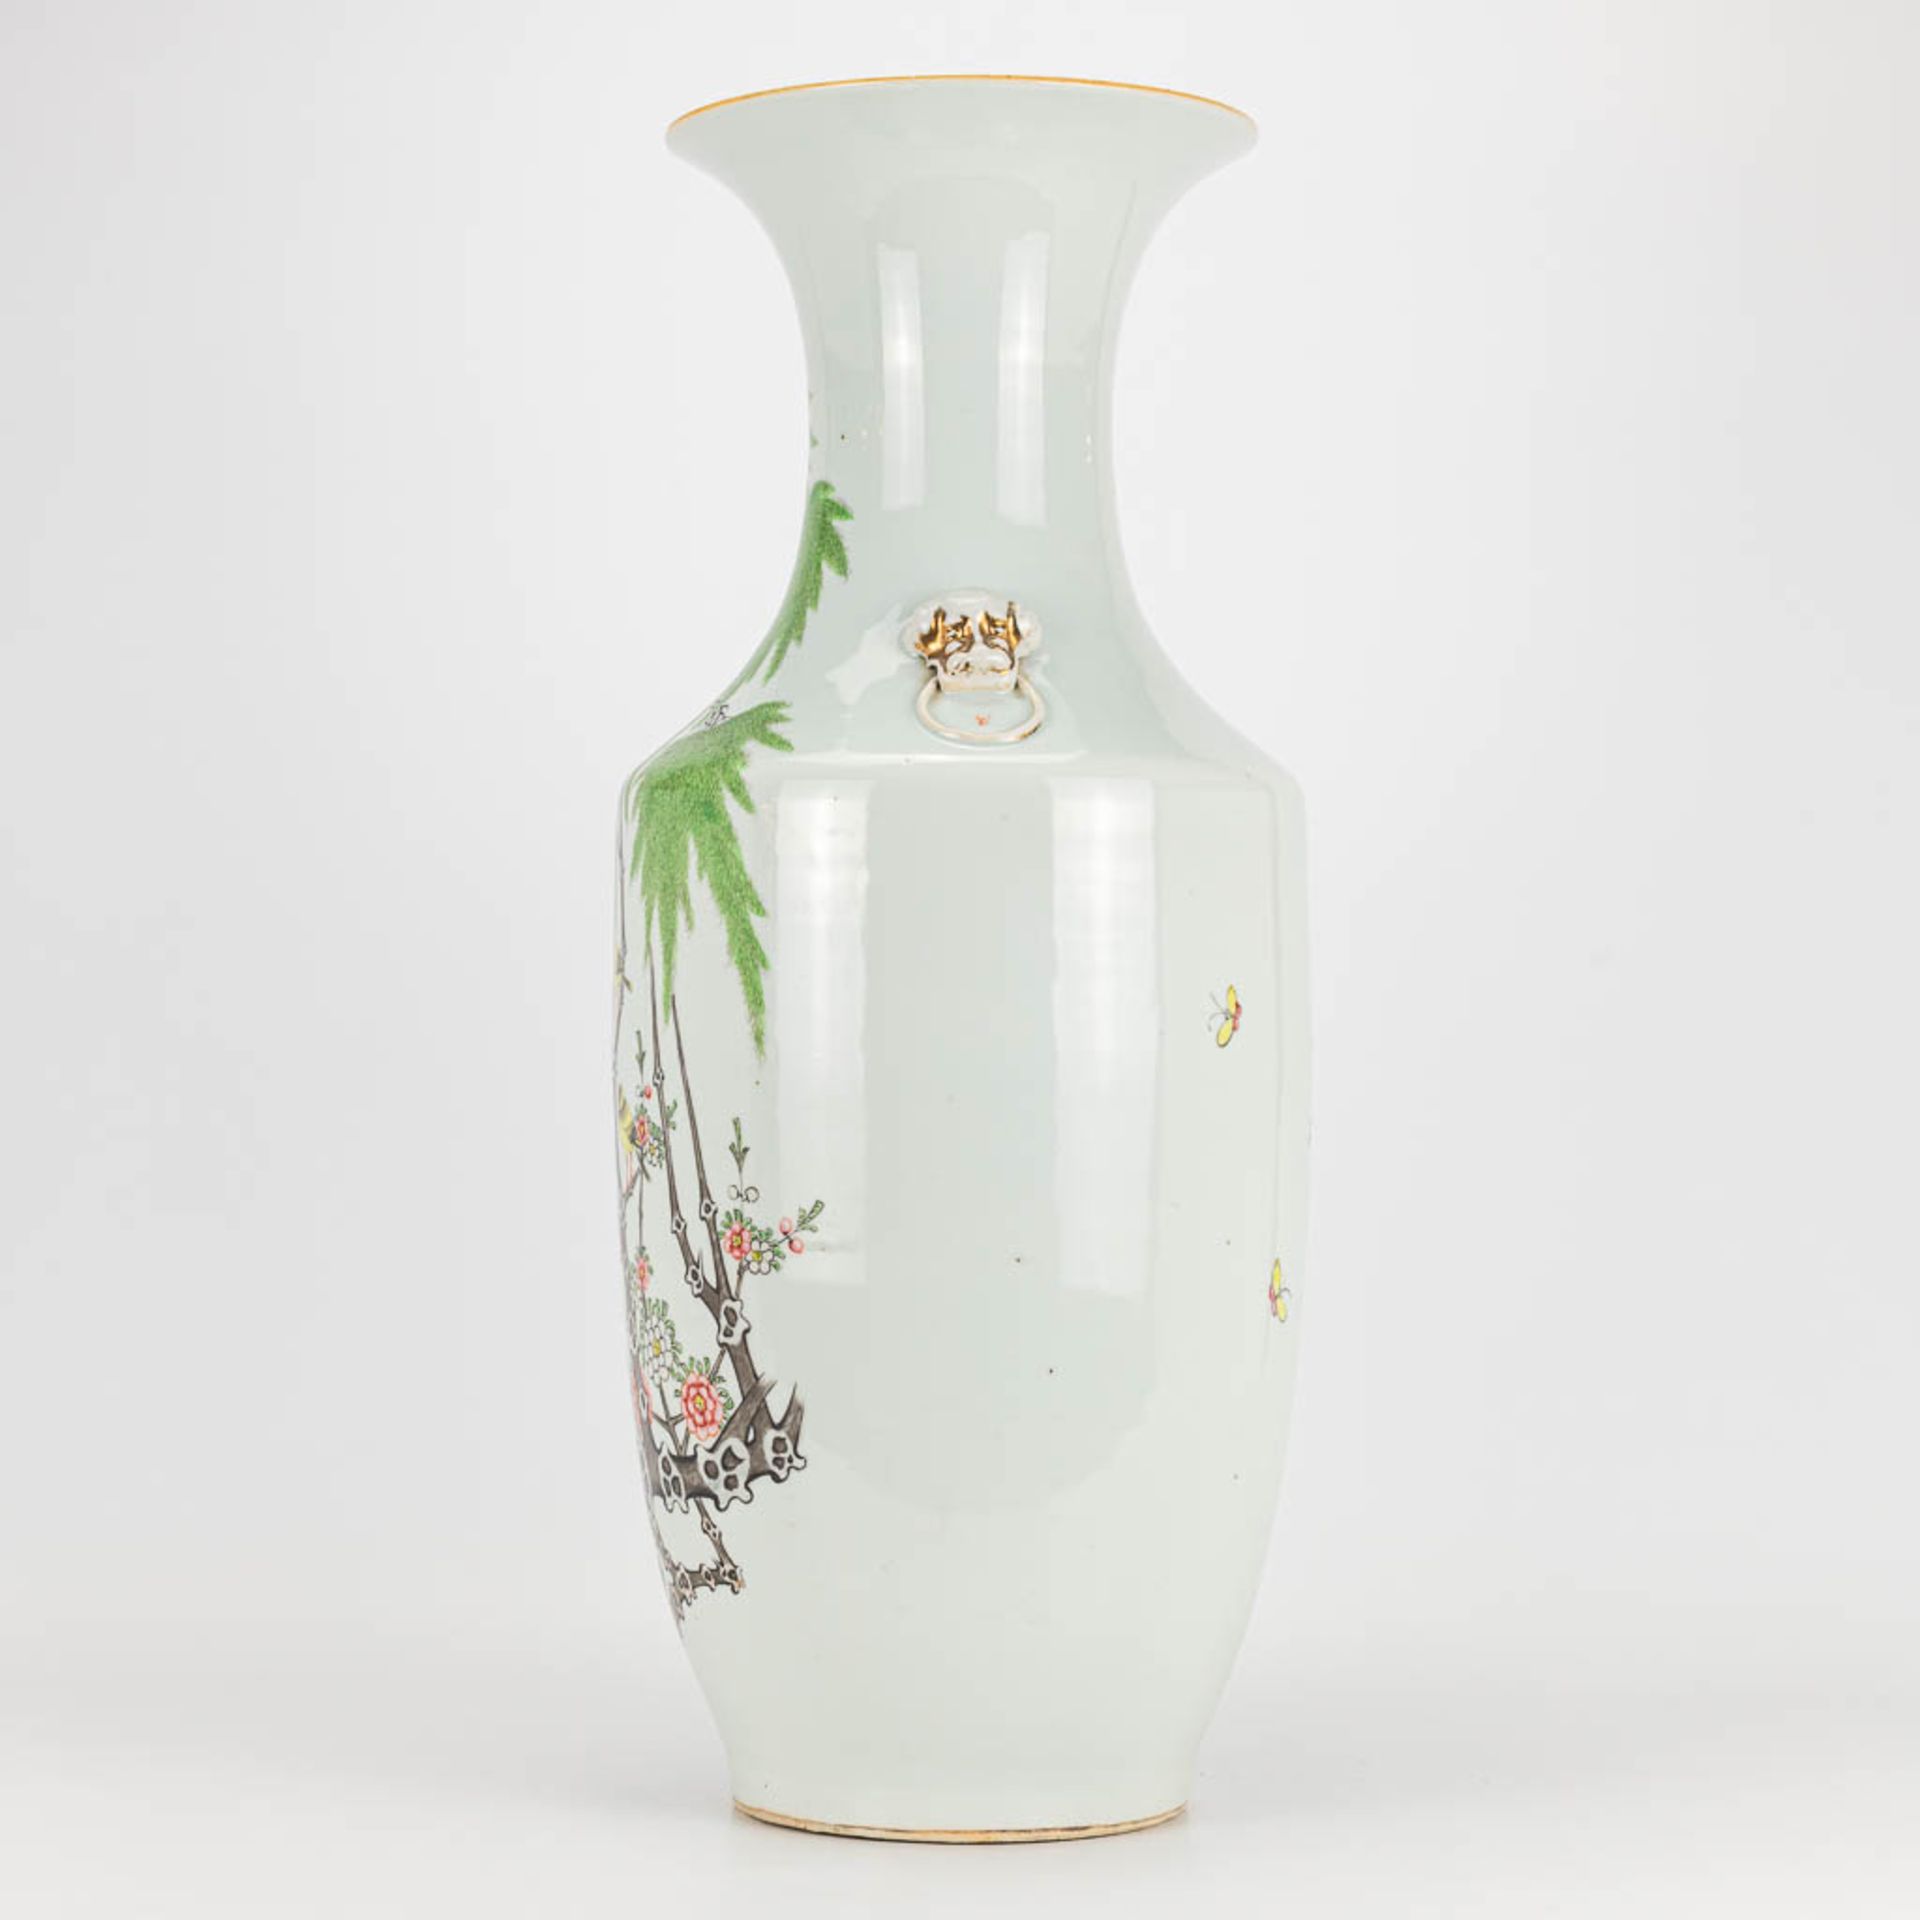 A vase made of Chinese porcelain and decorated with flowers and birds. - Image 10 of 16